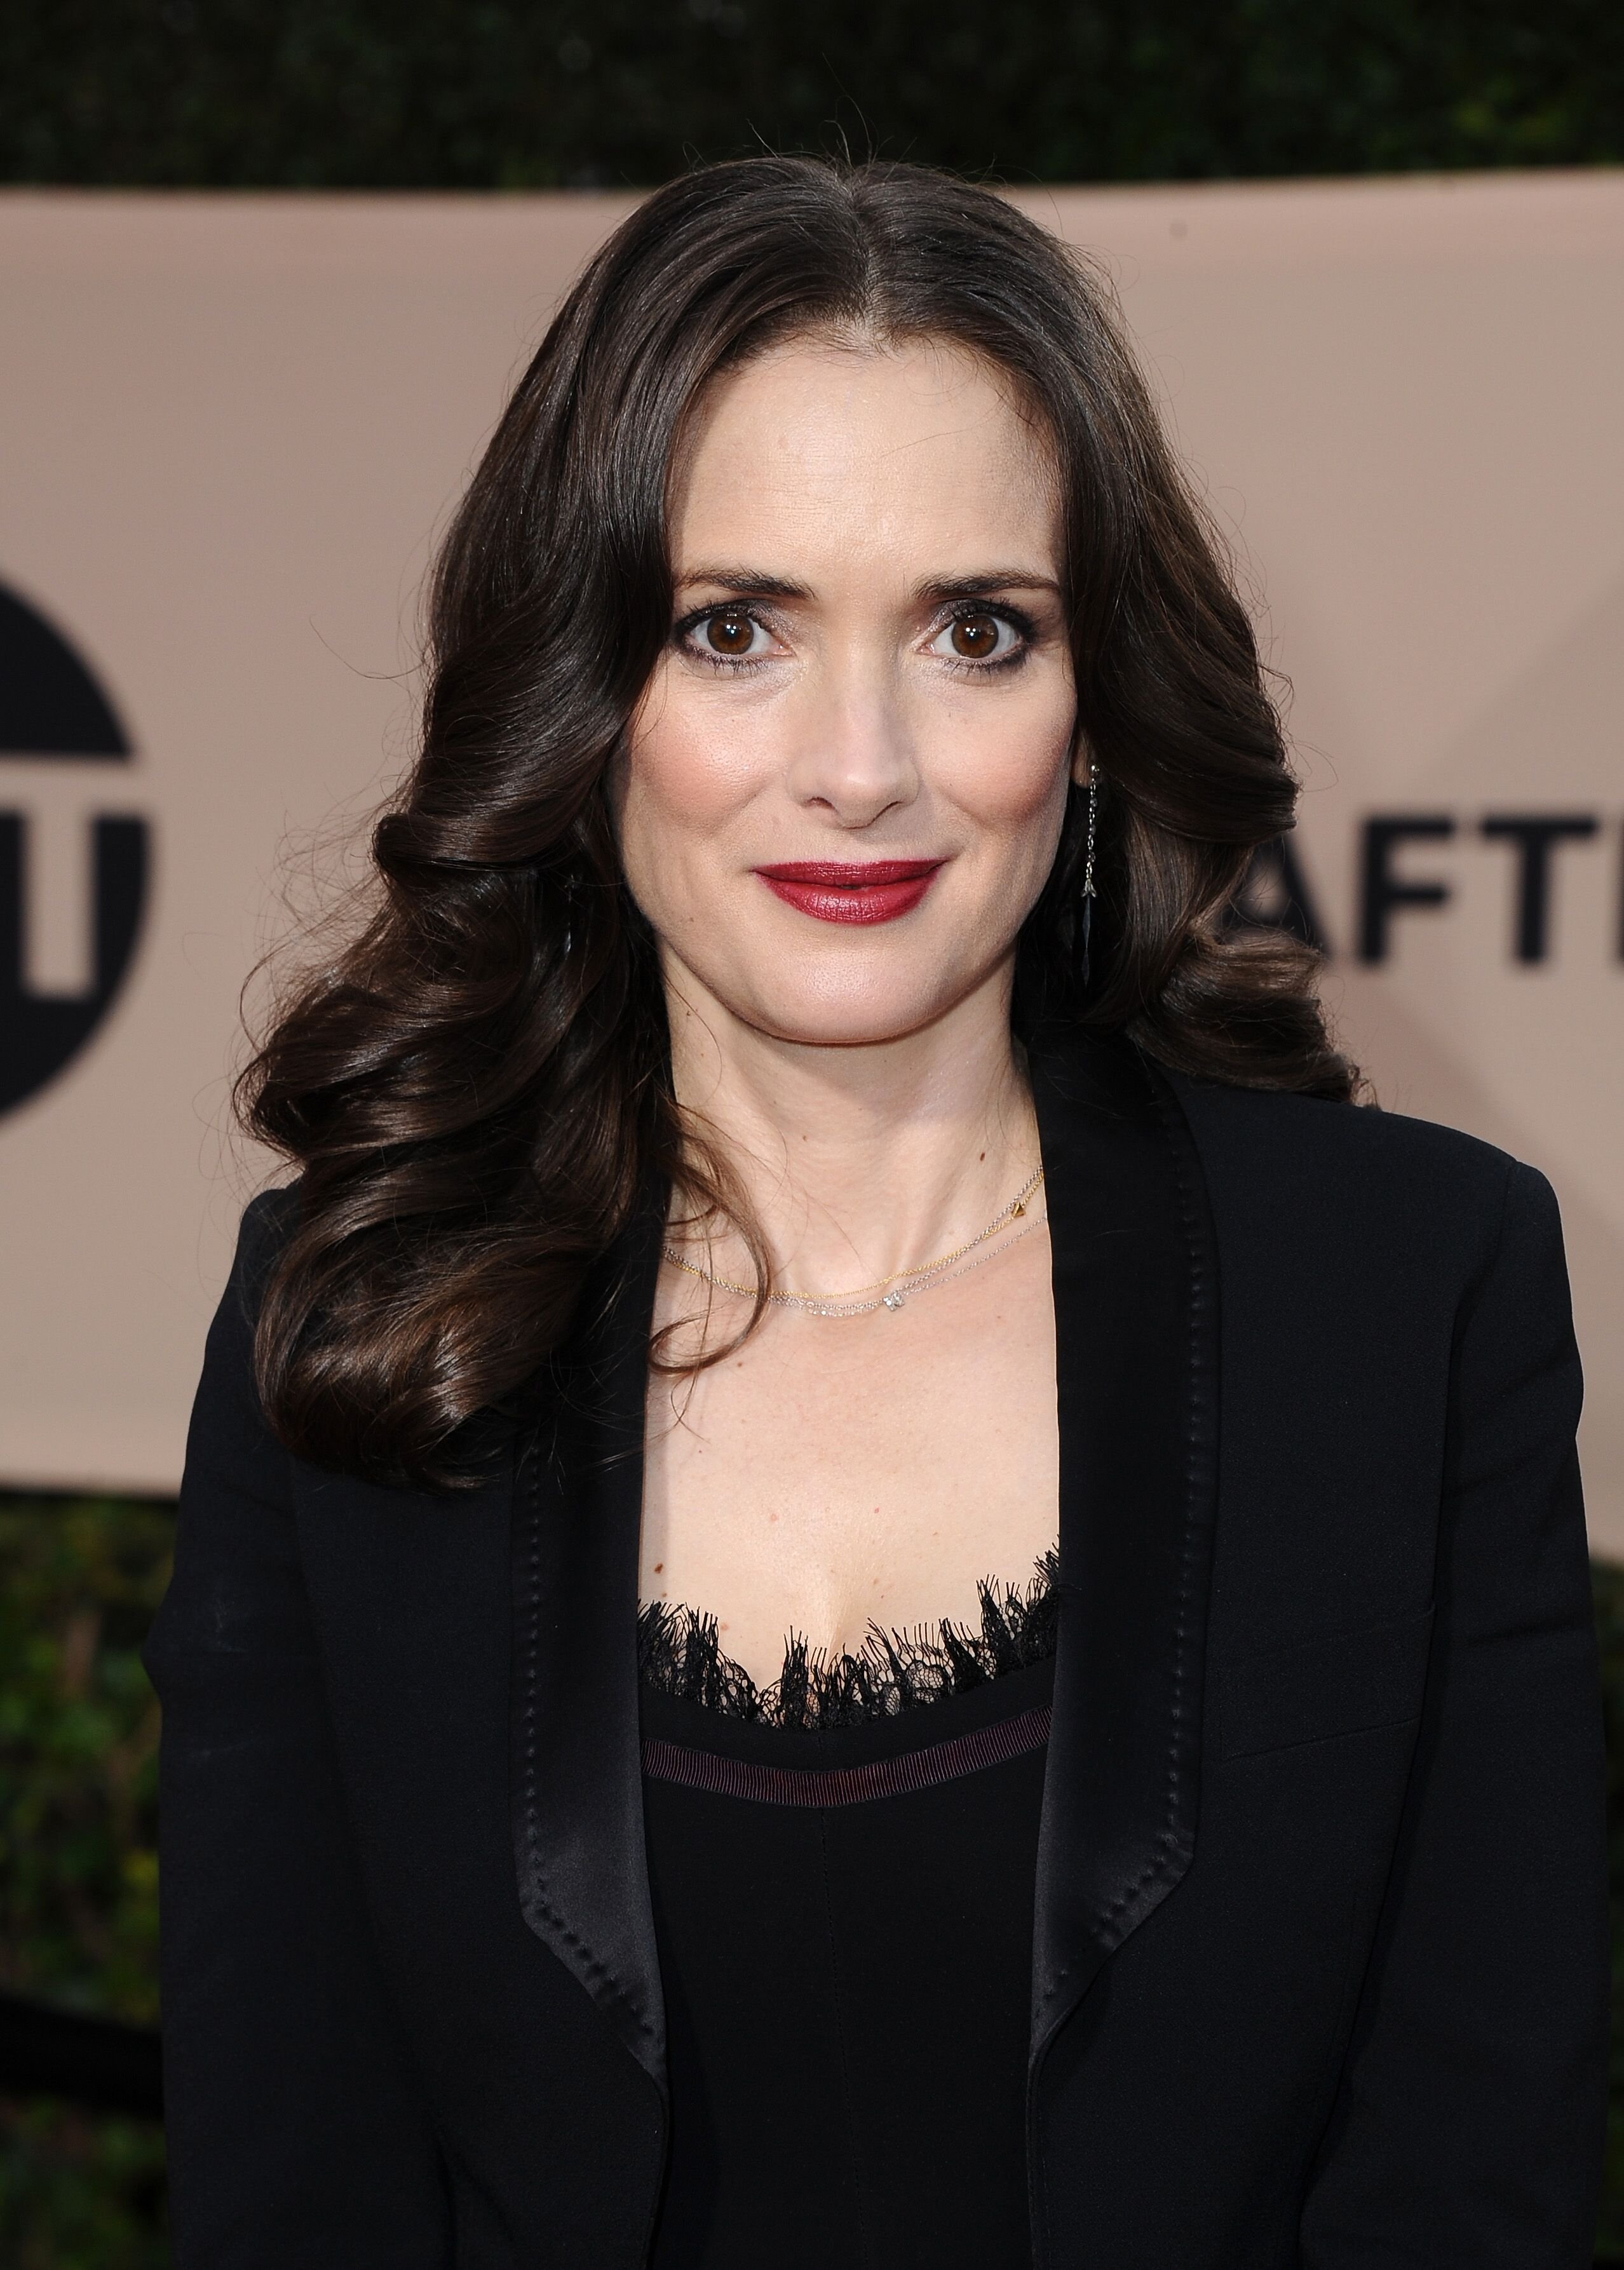 Winona Ryder attends the 24th Annual Screen Actors Guild Awards at The Shrine Auditorium. | Source: Getty Images